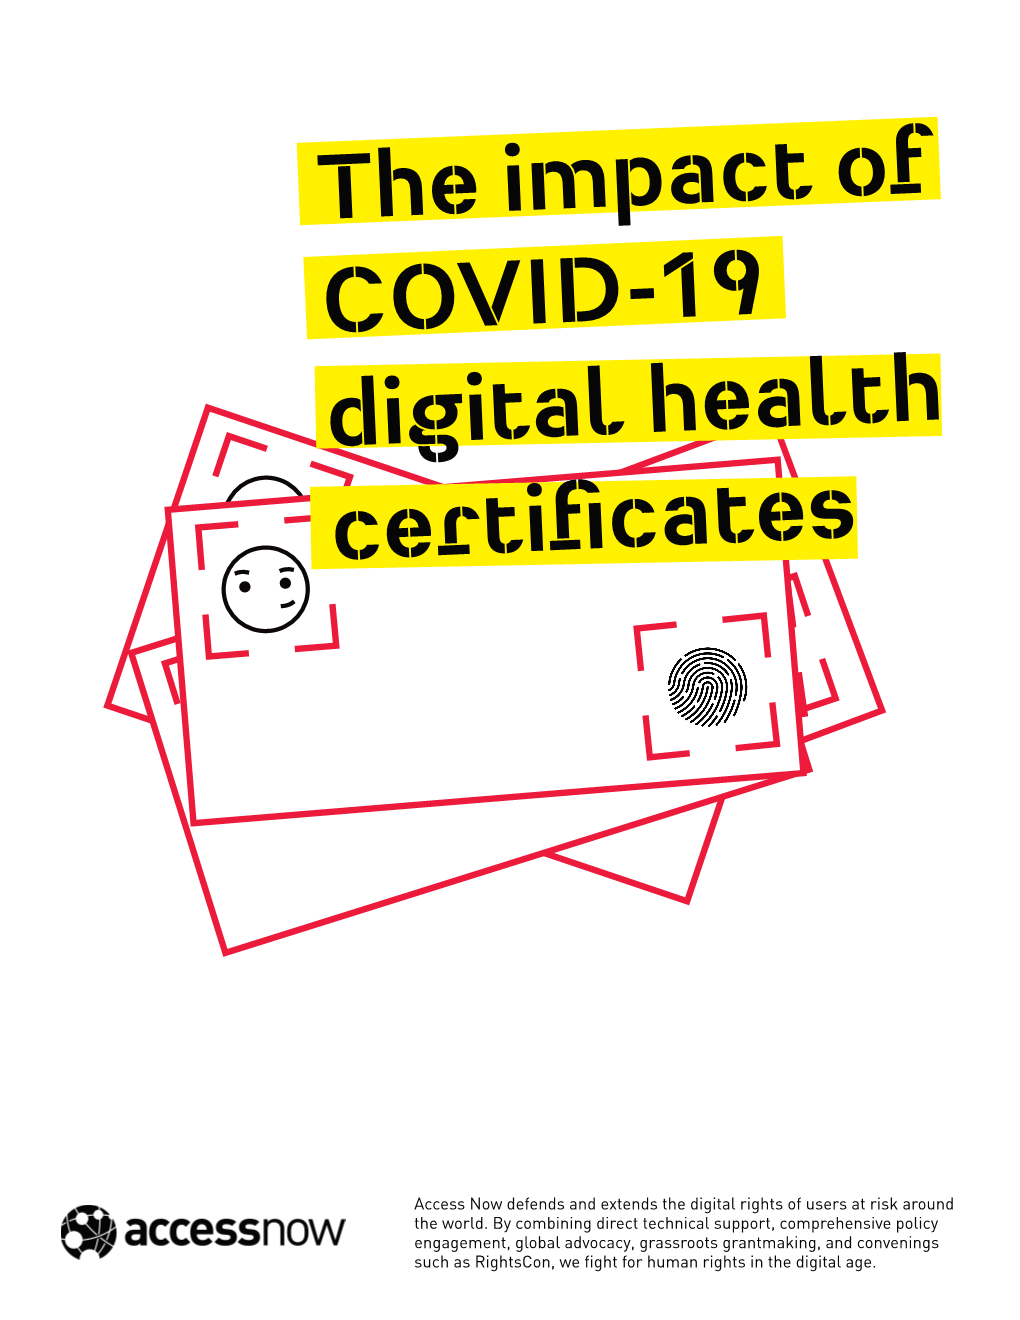 The Impact of COVID-19 Digital Health Certificates